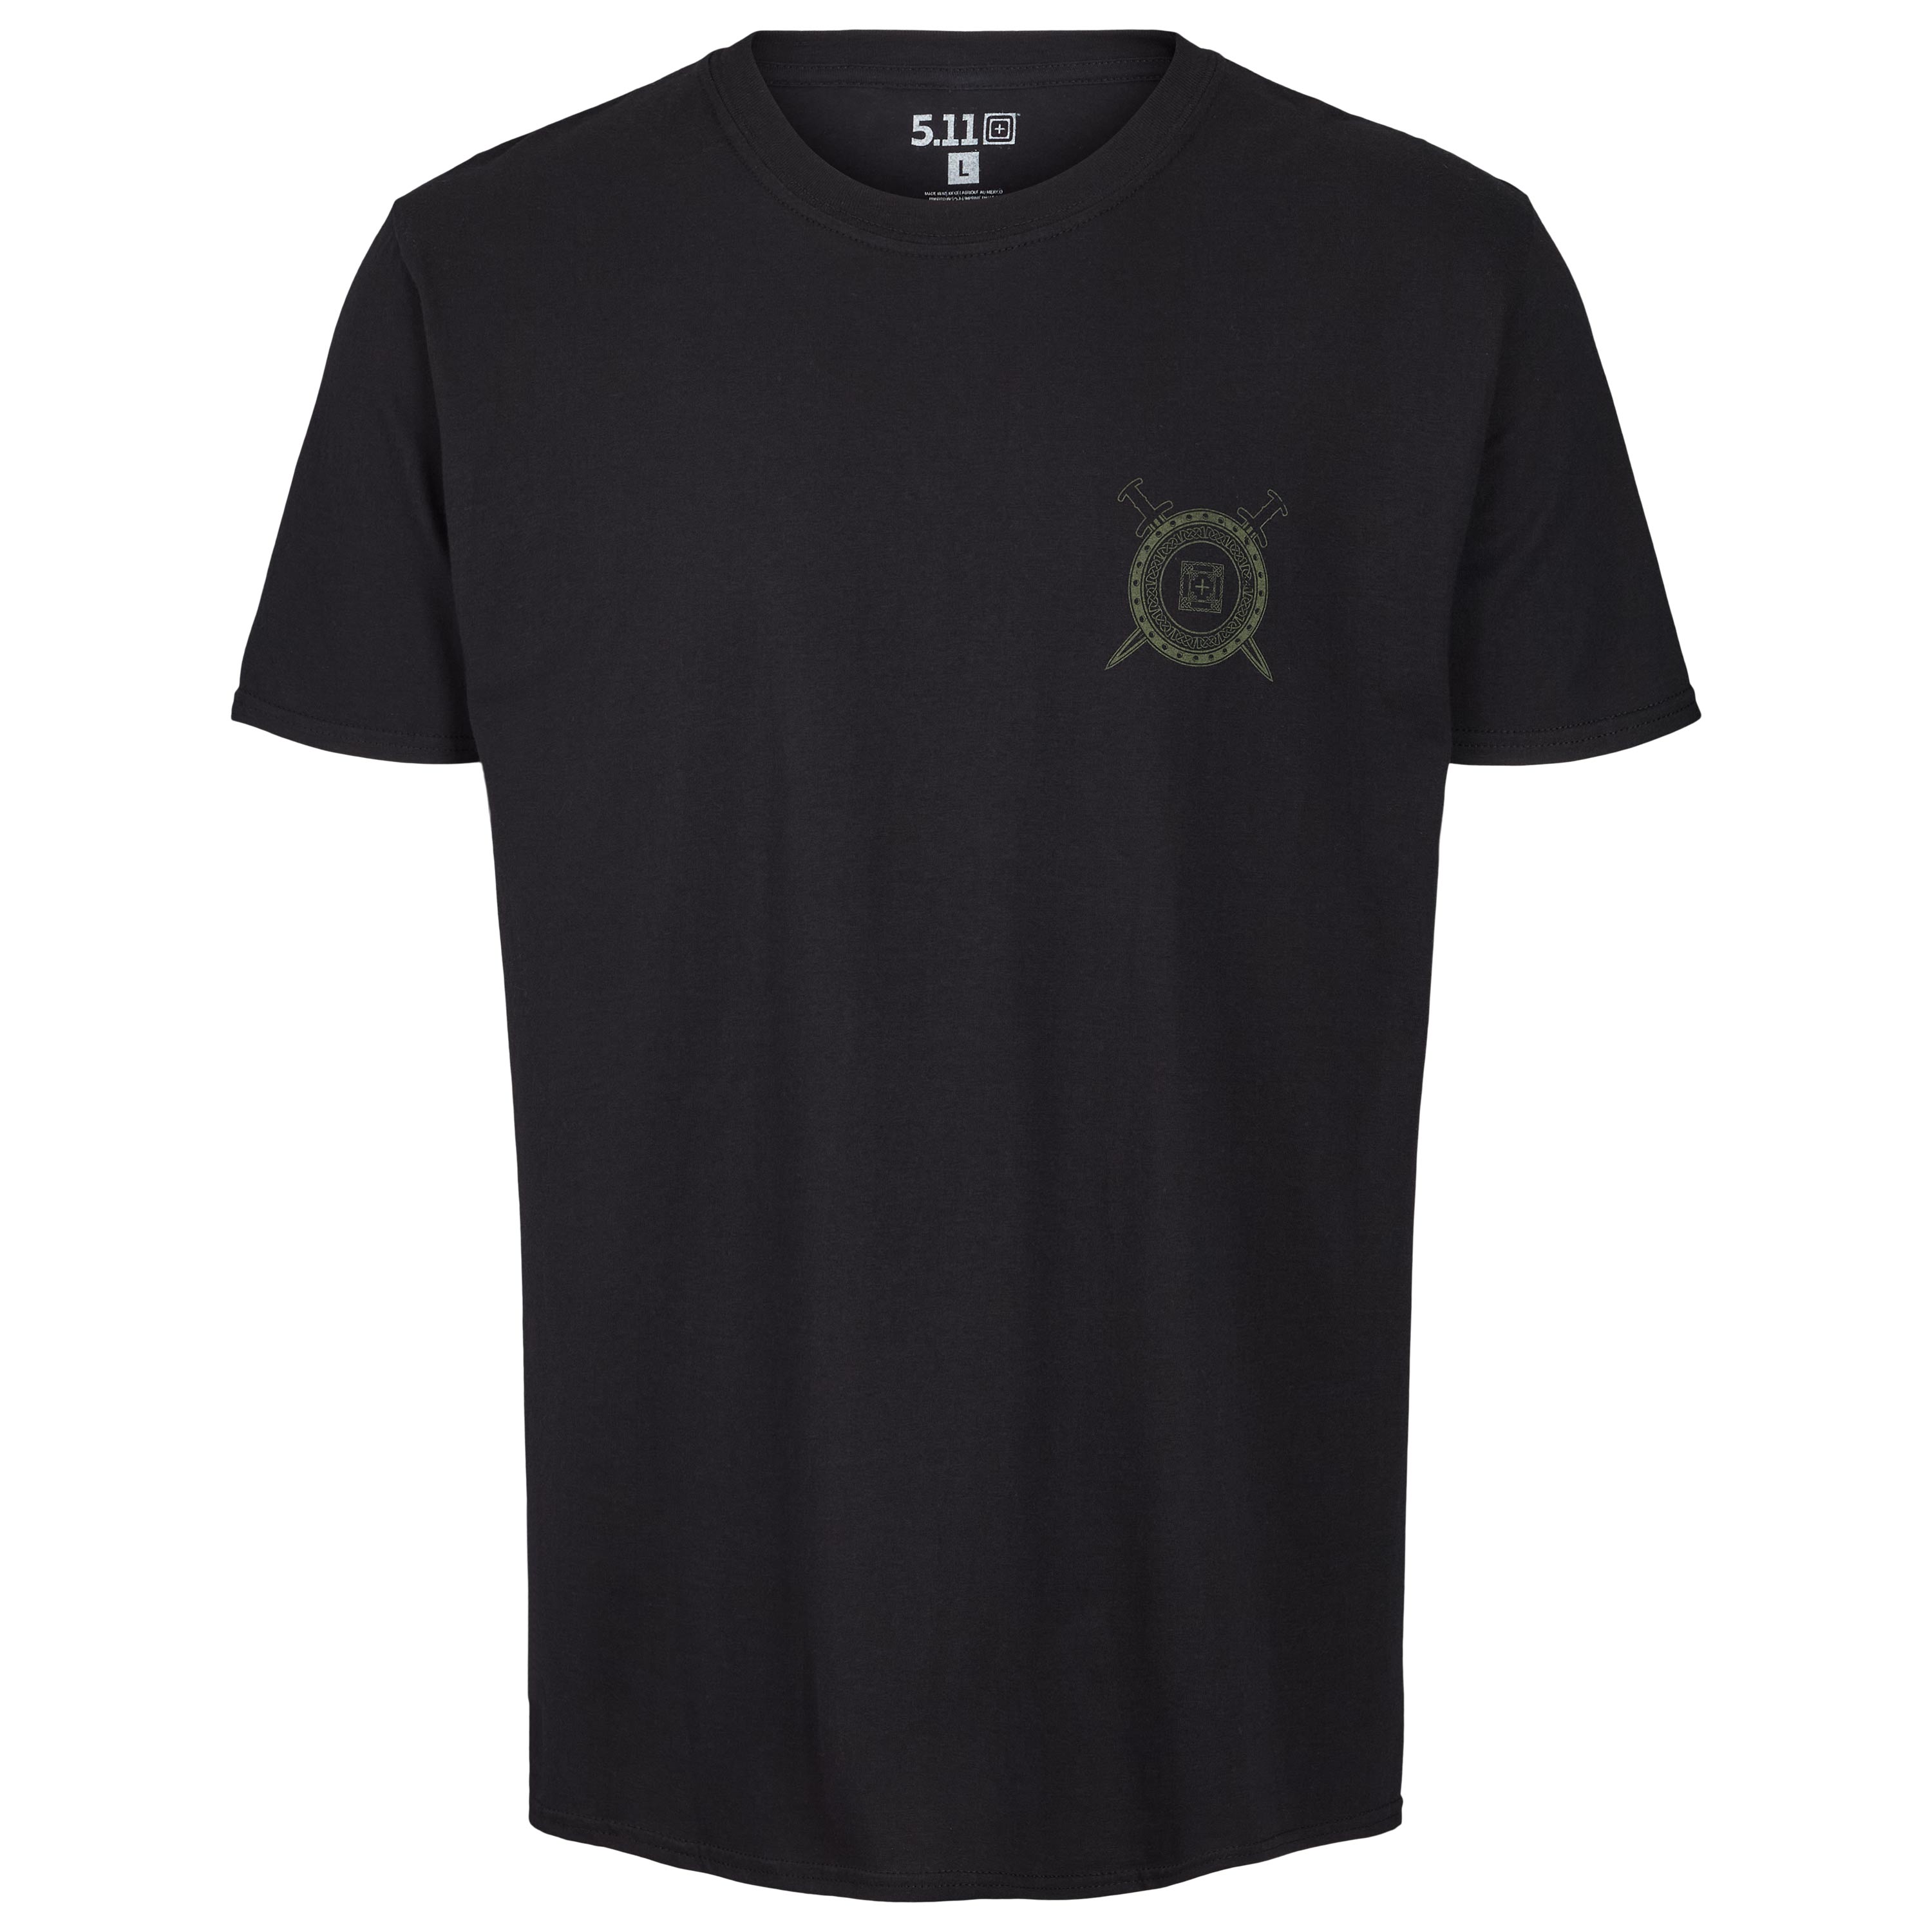 Purchase the 5.11 Warrior of Valhalla T-Shirt black by ASMC